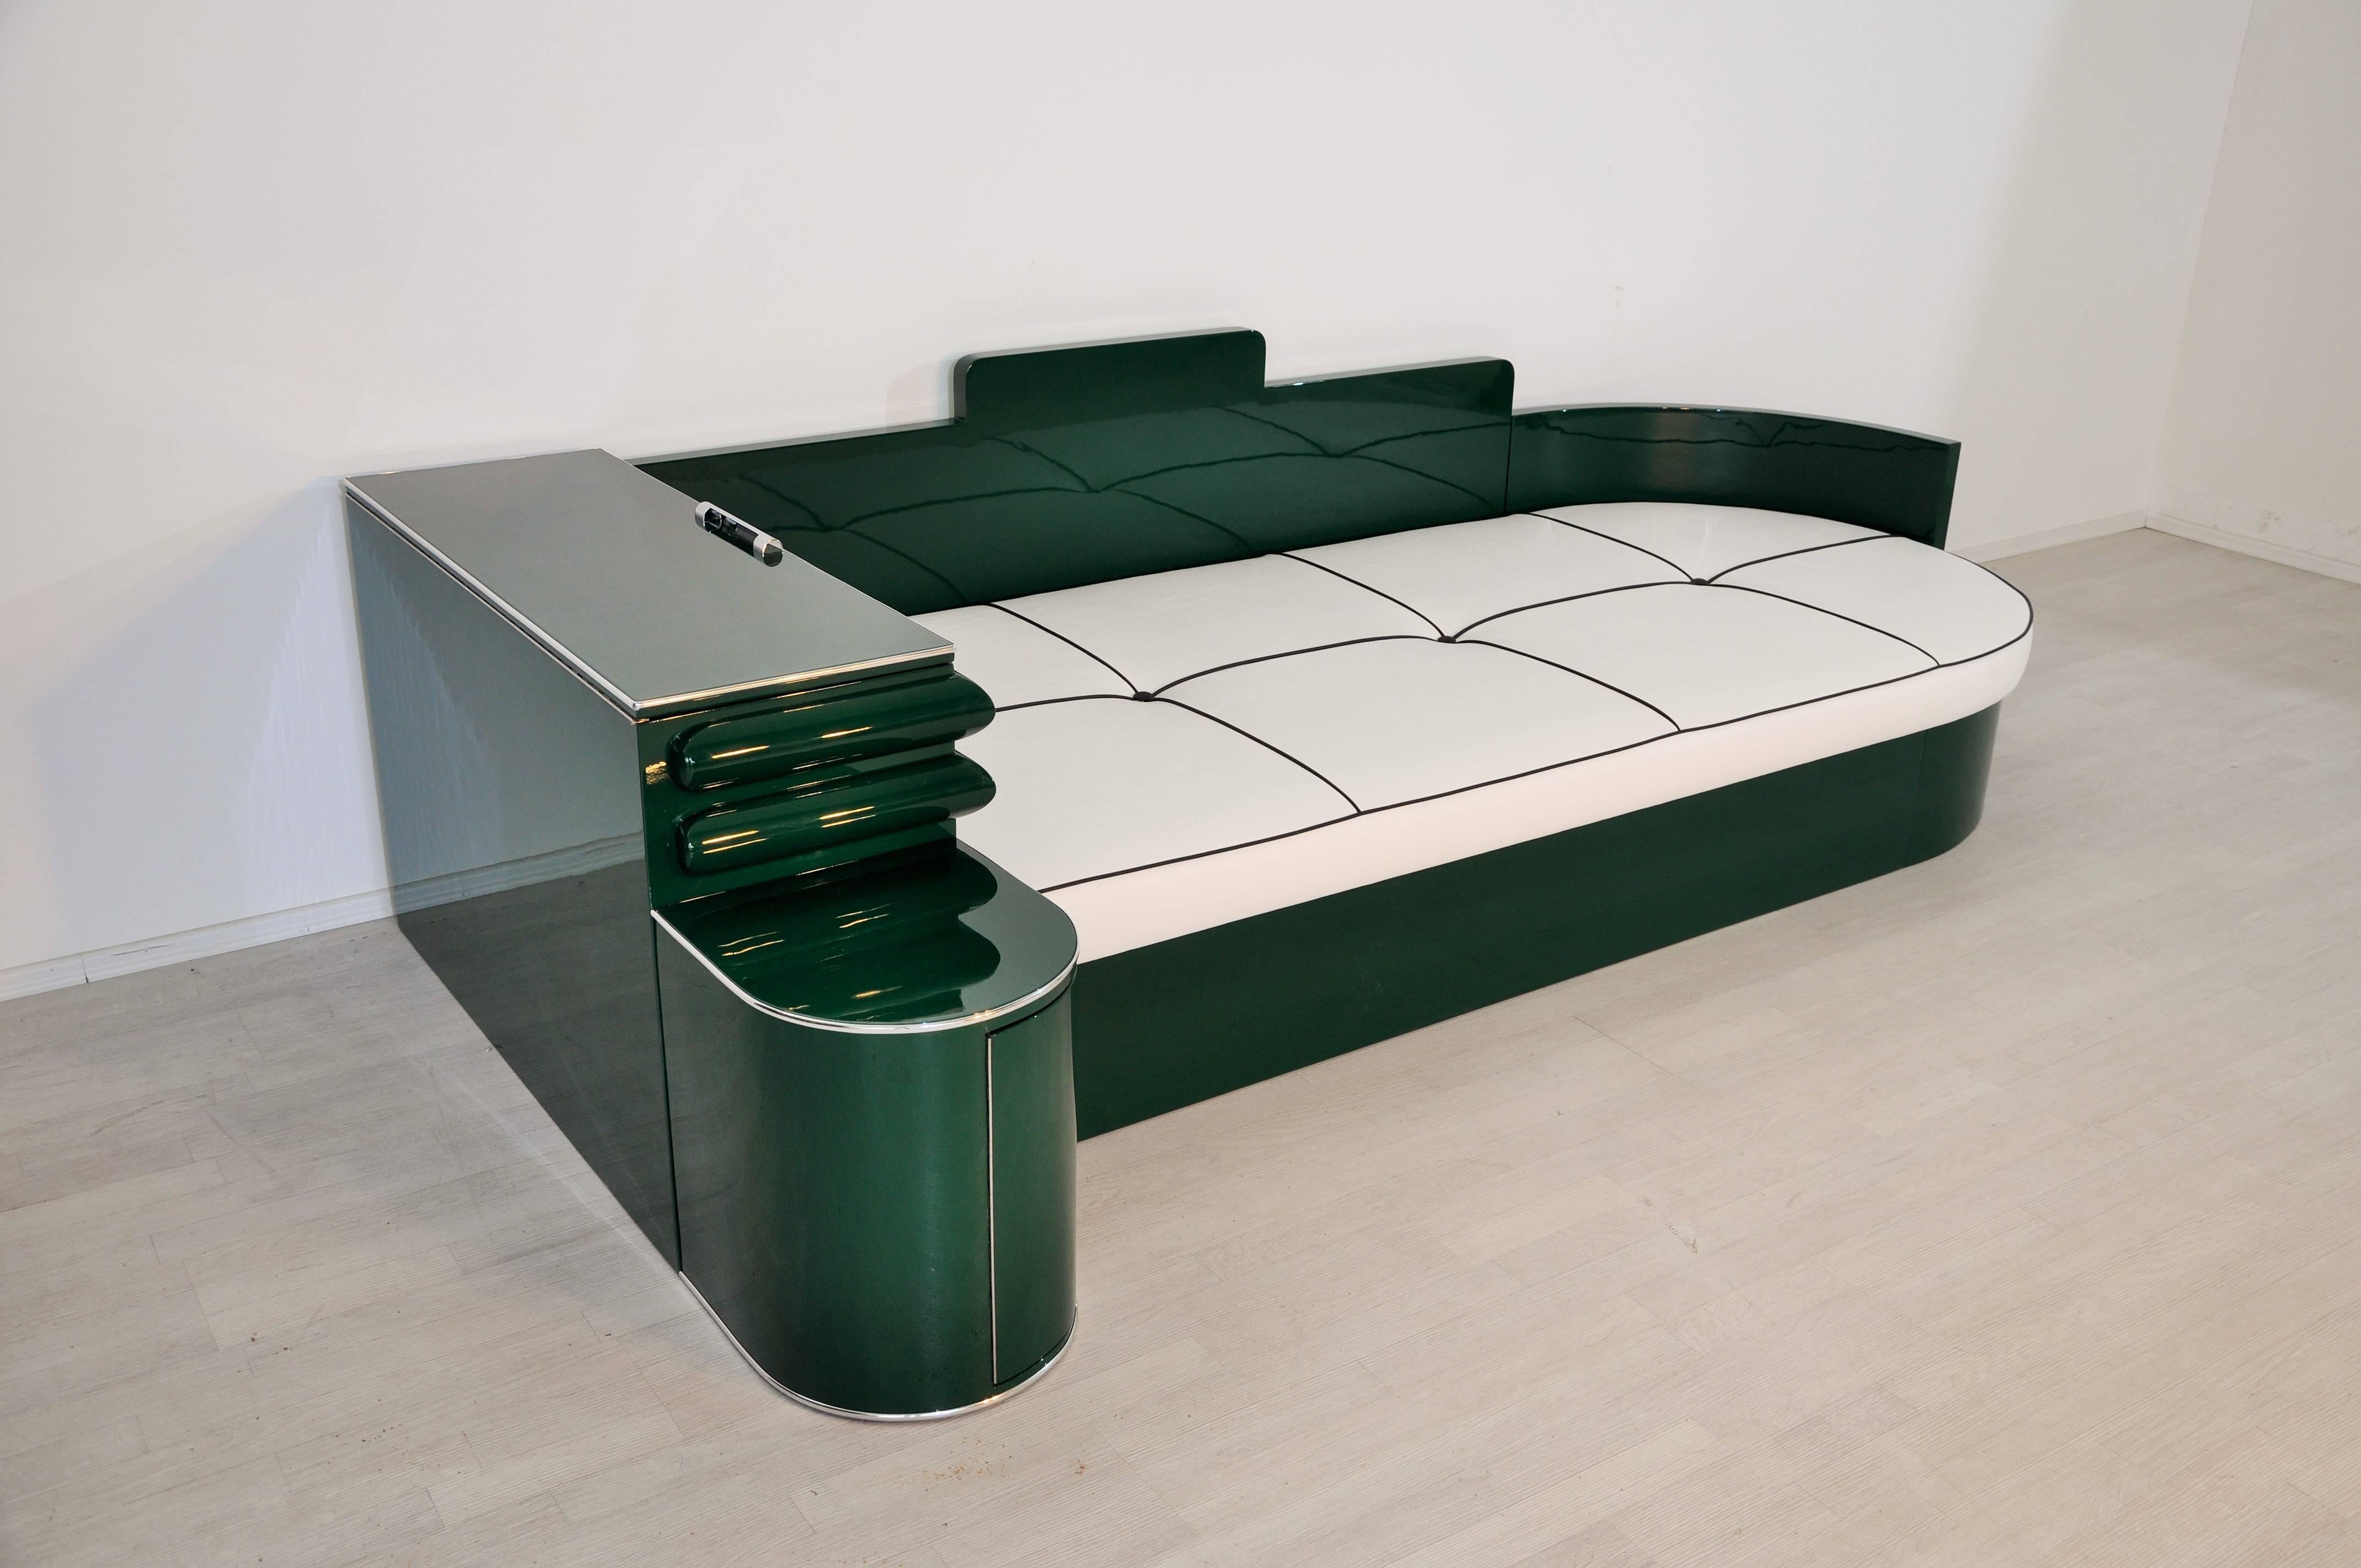 Galvanized High Gloss Art Deco Daybed from France in Jaguar Racing Green